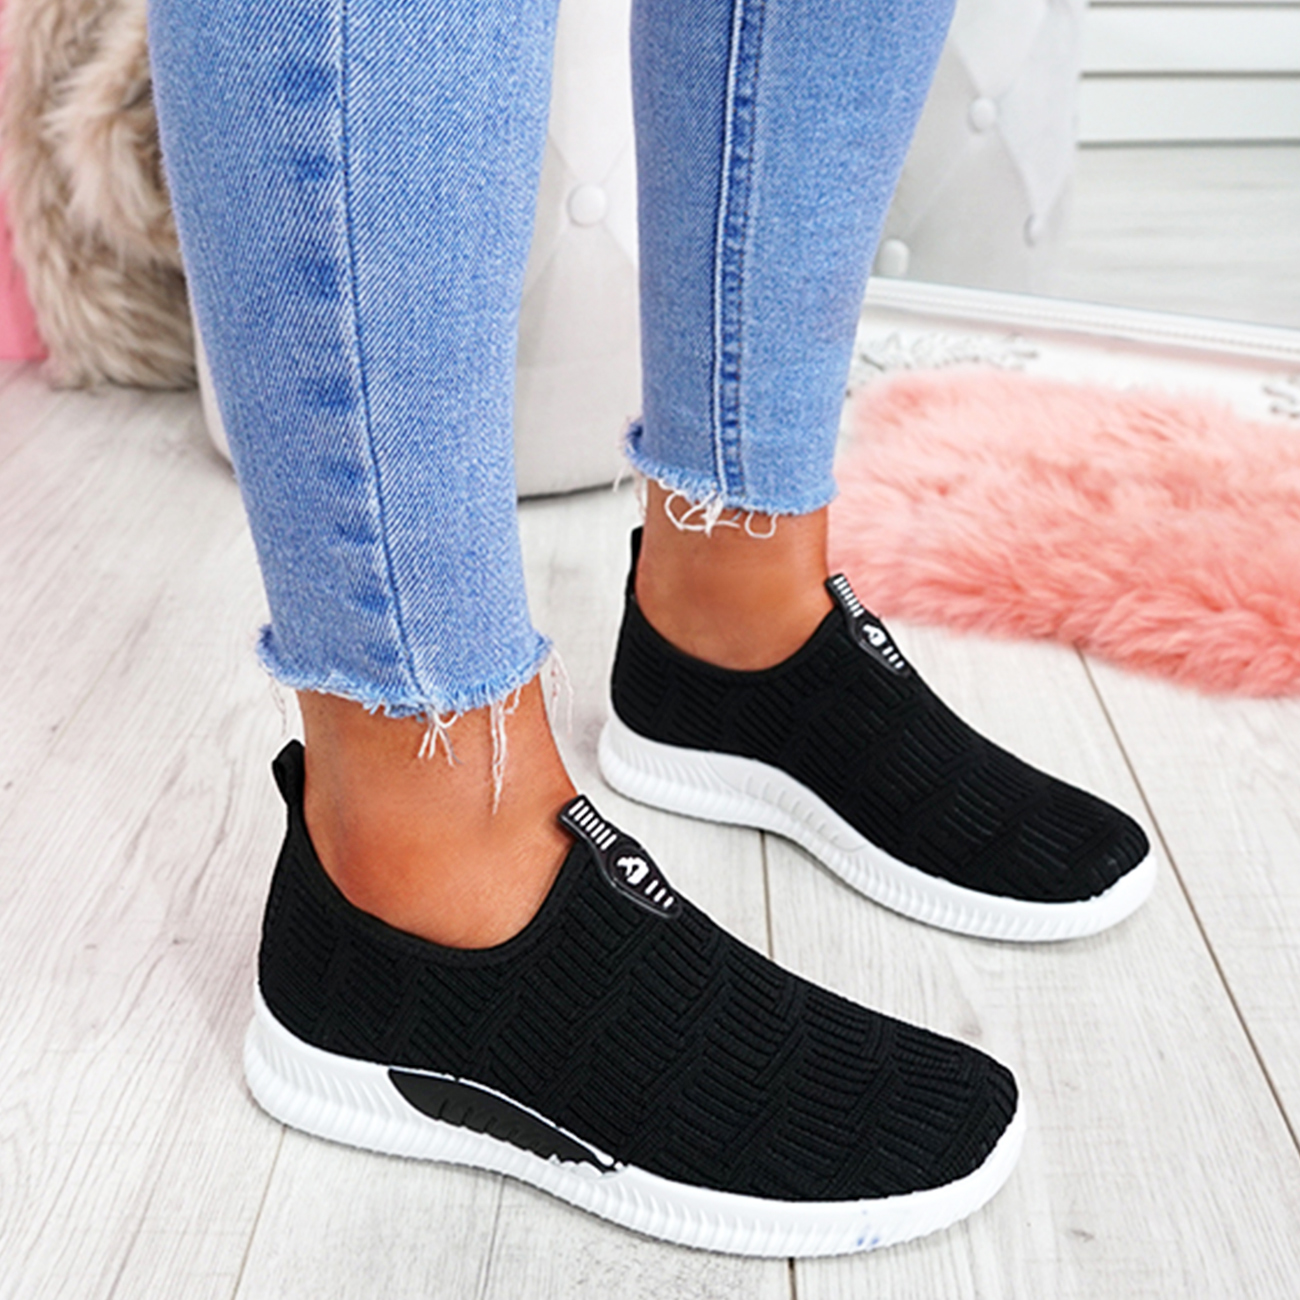 Womens Ladies Slip On Knit Trainers Heel Running Cycling Sneakers Casual Shoes